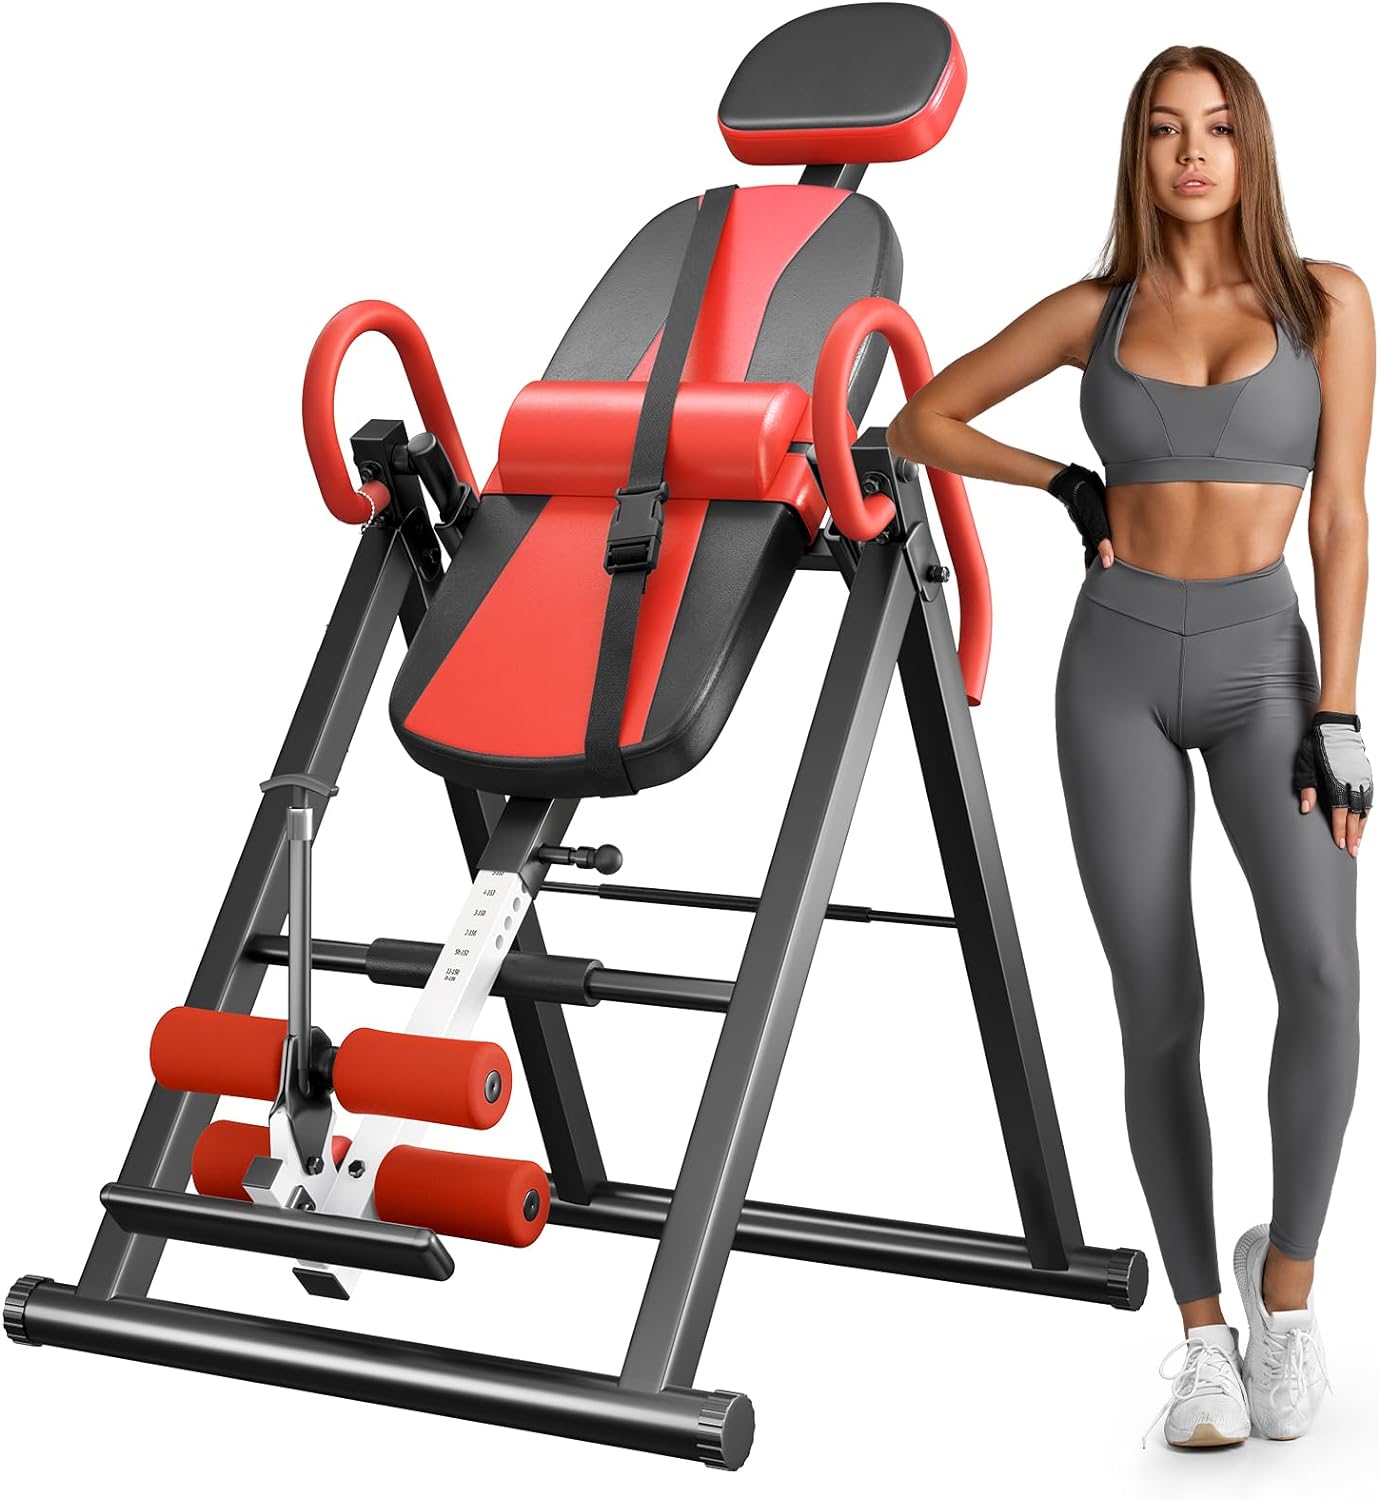 Gravity Heavy Duty Inversion Table with Headrest & Adjustable Protective Belt Back Stretcher Machine for Pain Relief Therapy